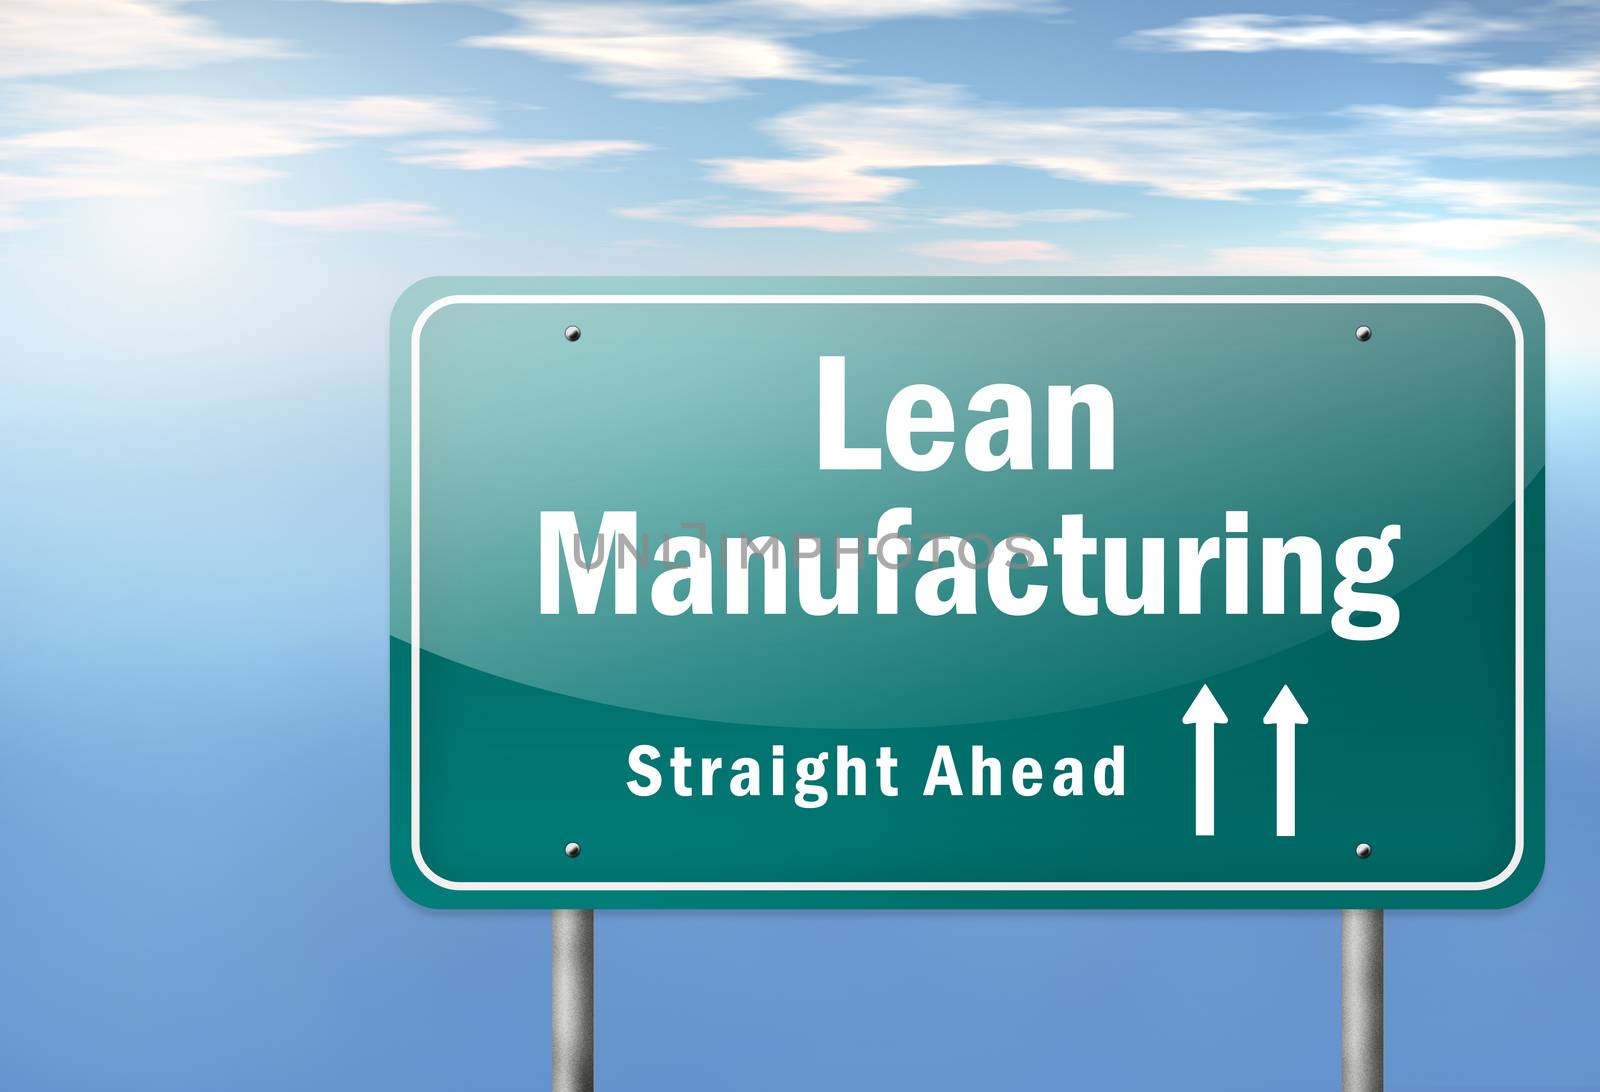 Highway Signpost "Lean Manufacturing"